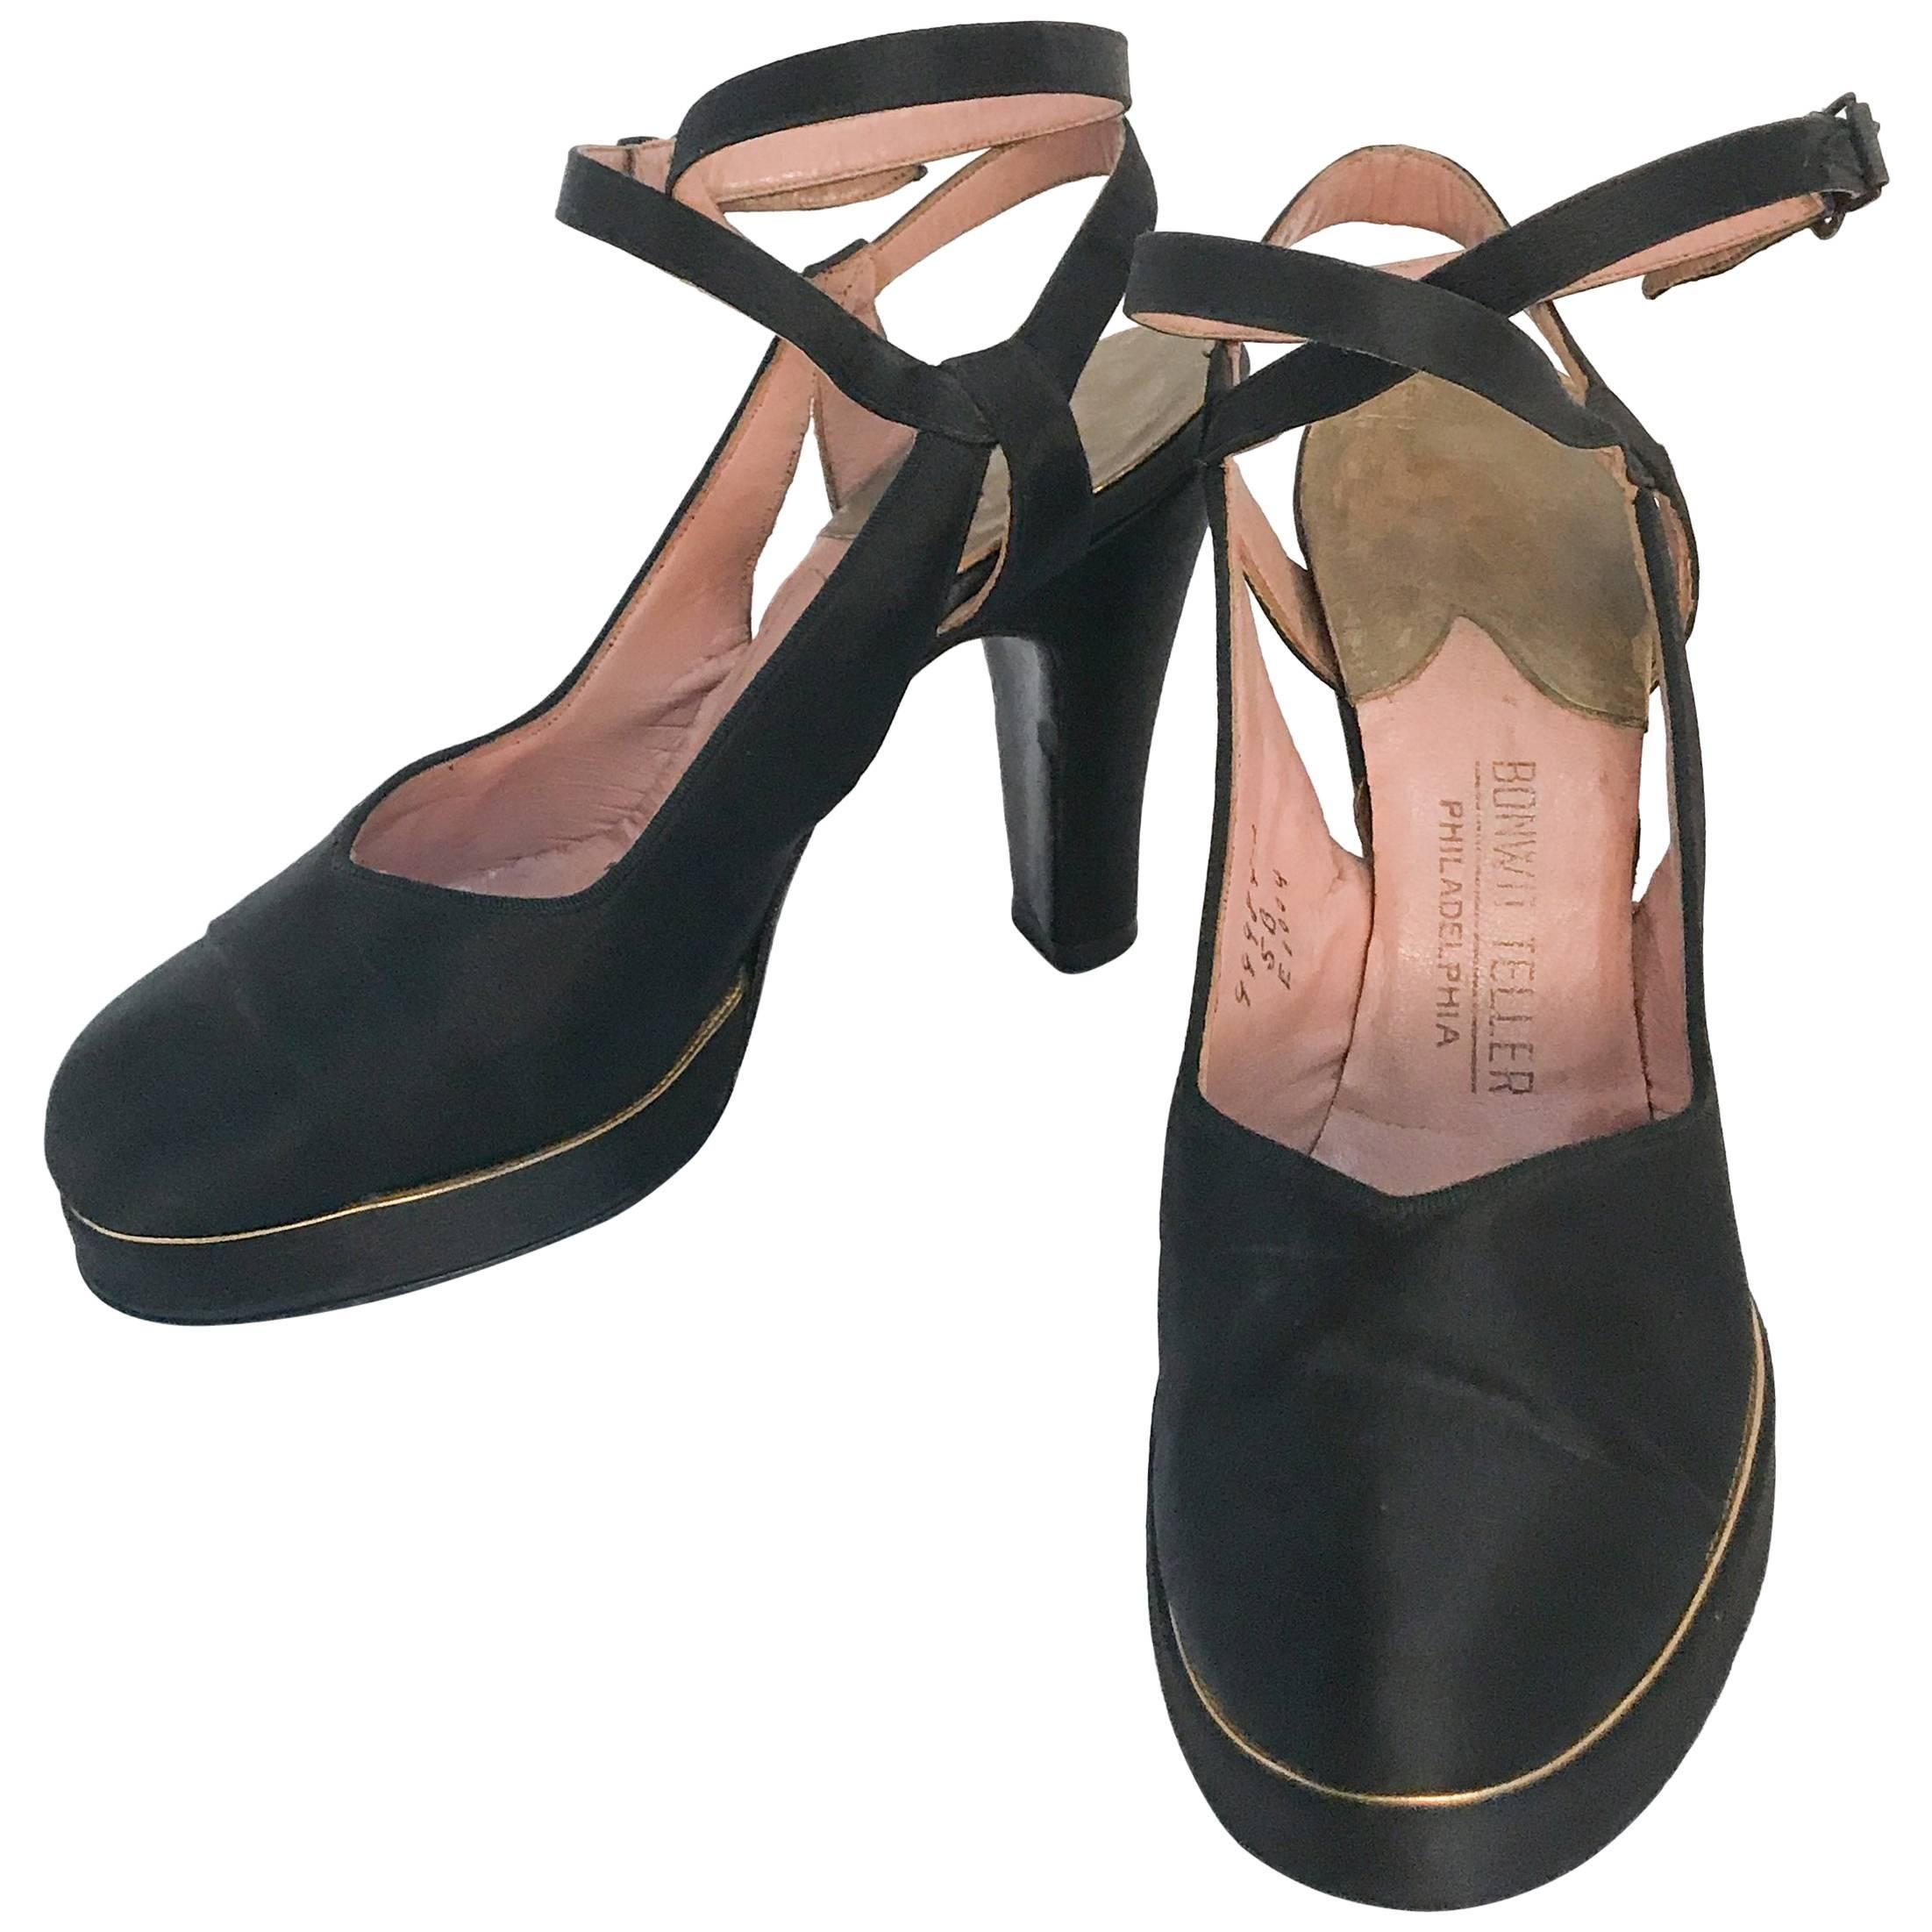 1940s Black and Gold Satin Strap Heels